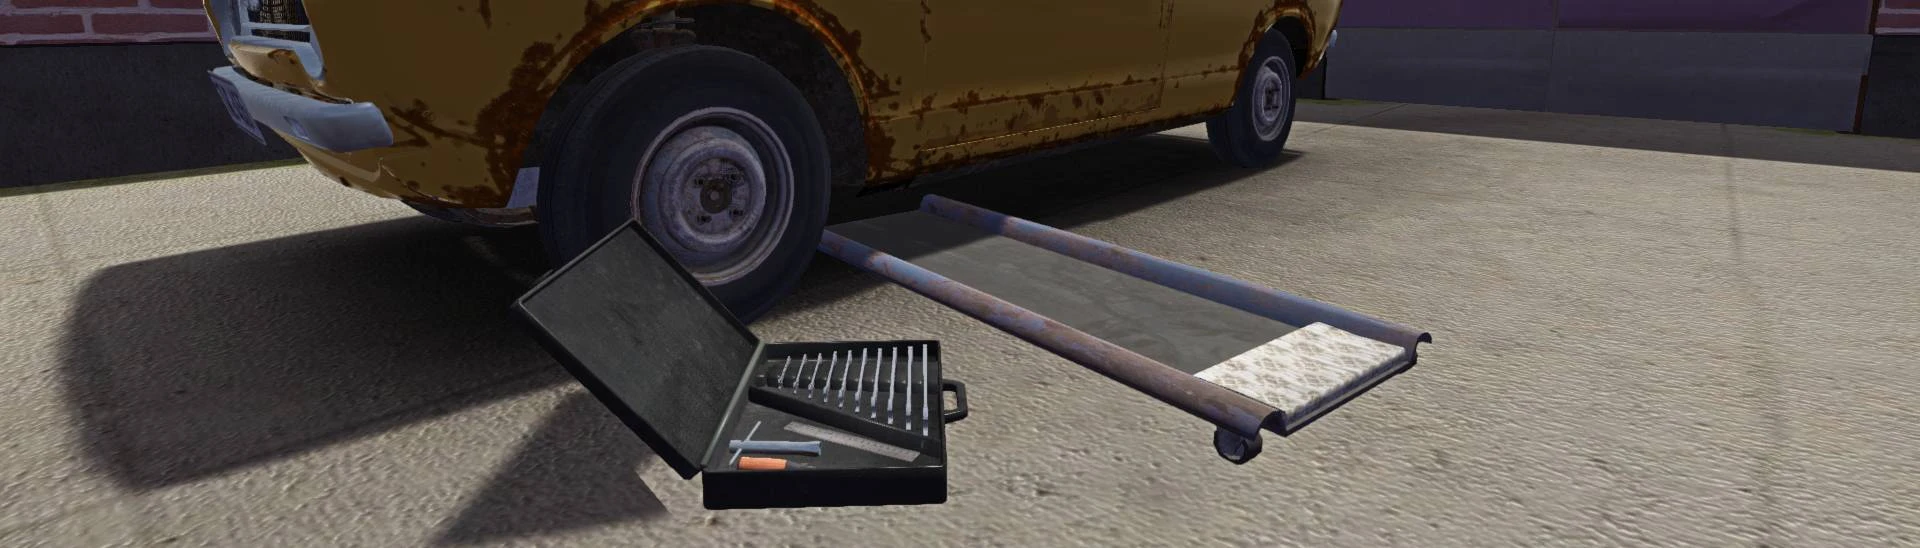 Planks at My Summer Car Nexus - Mods and community